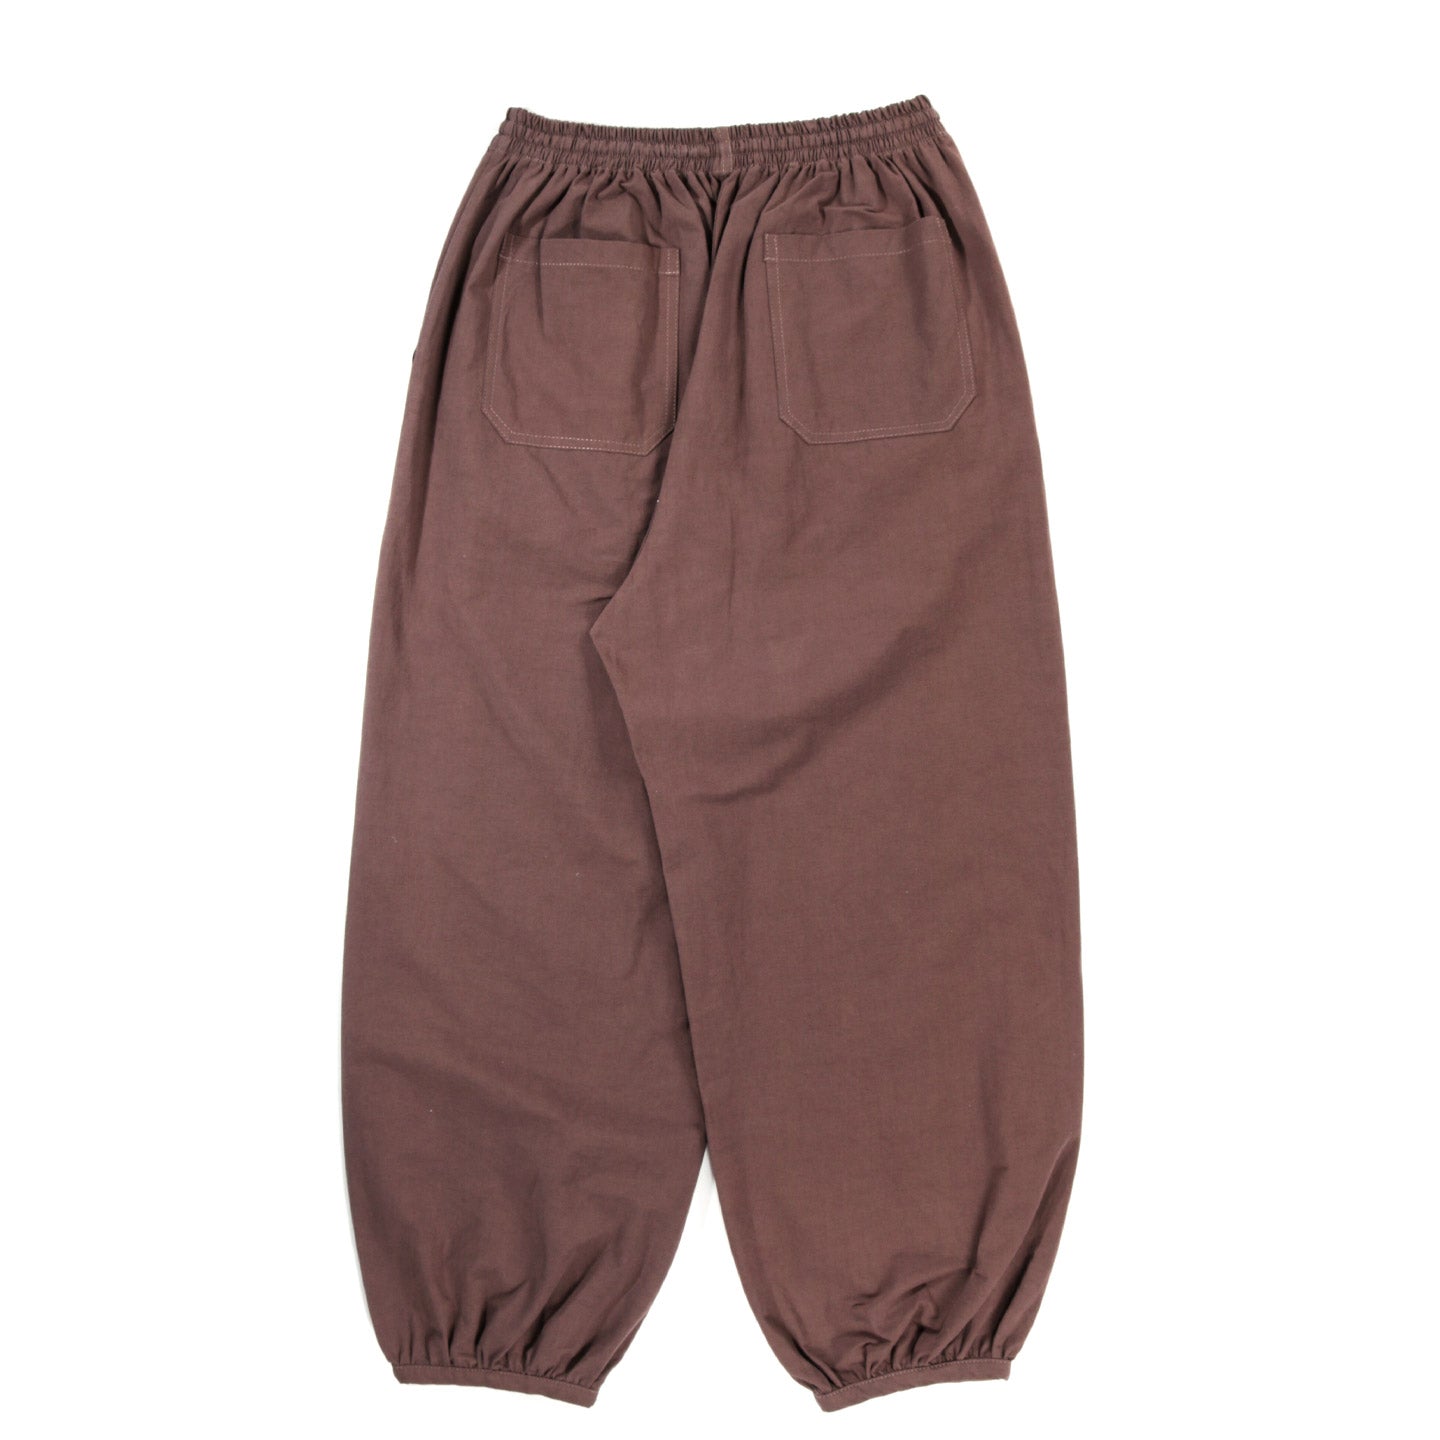 XENIA TELUNTS GATHERED CUFF PANT PATCHOULI